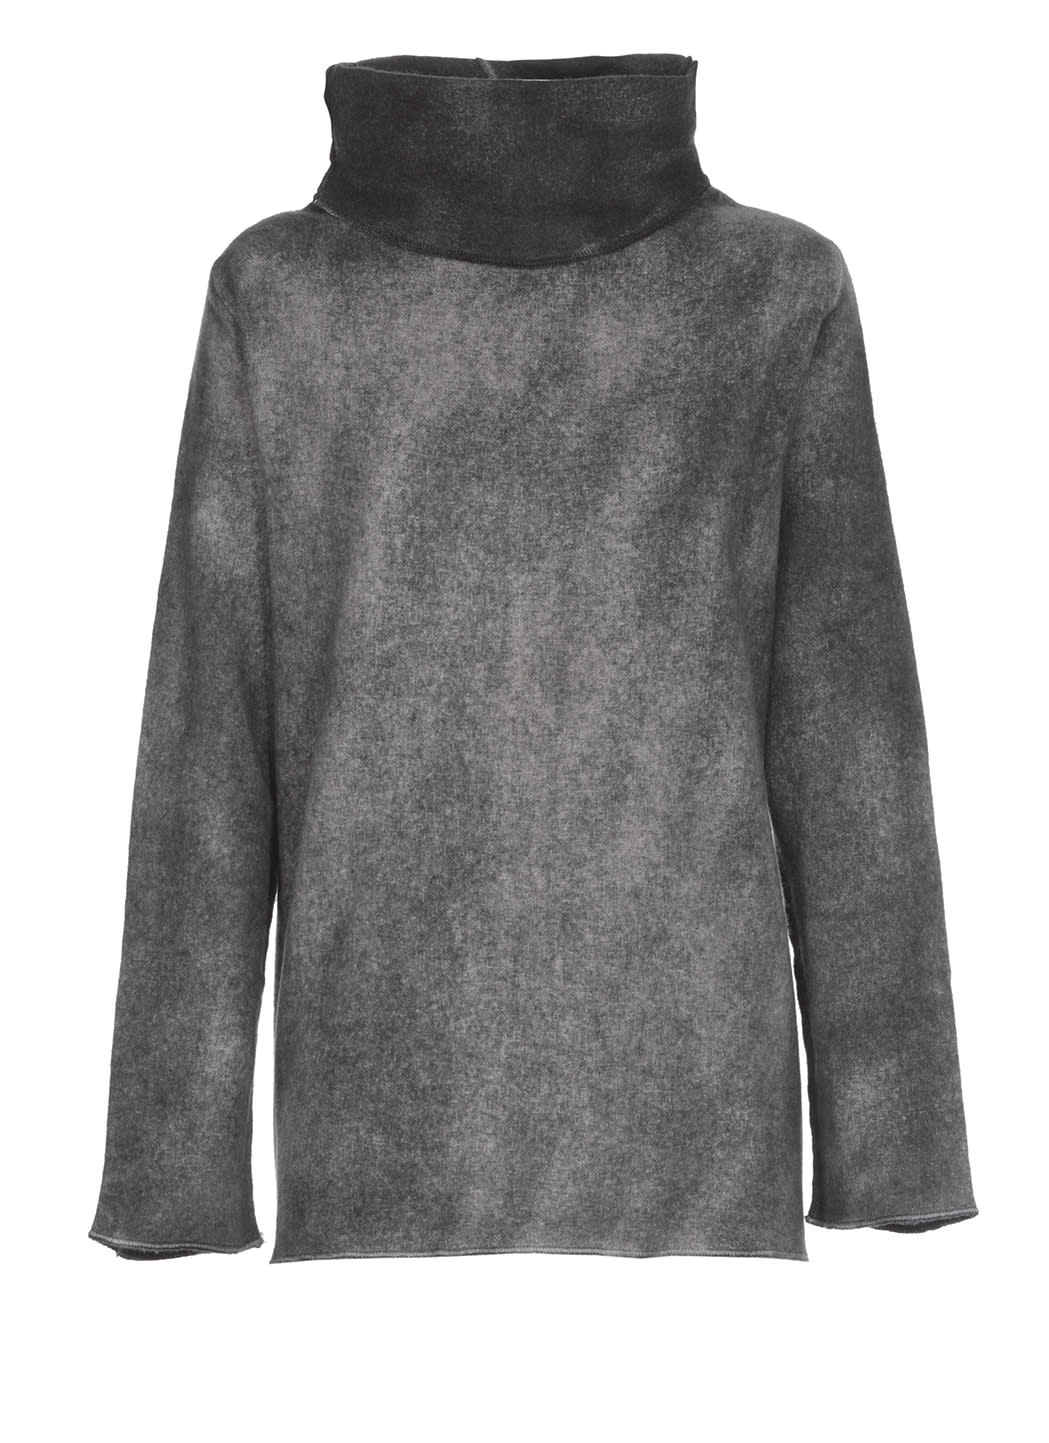 Avant Toi Virgin Wool And Cashmere Sweater